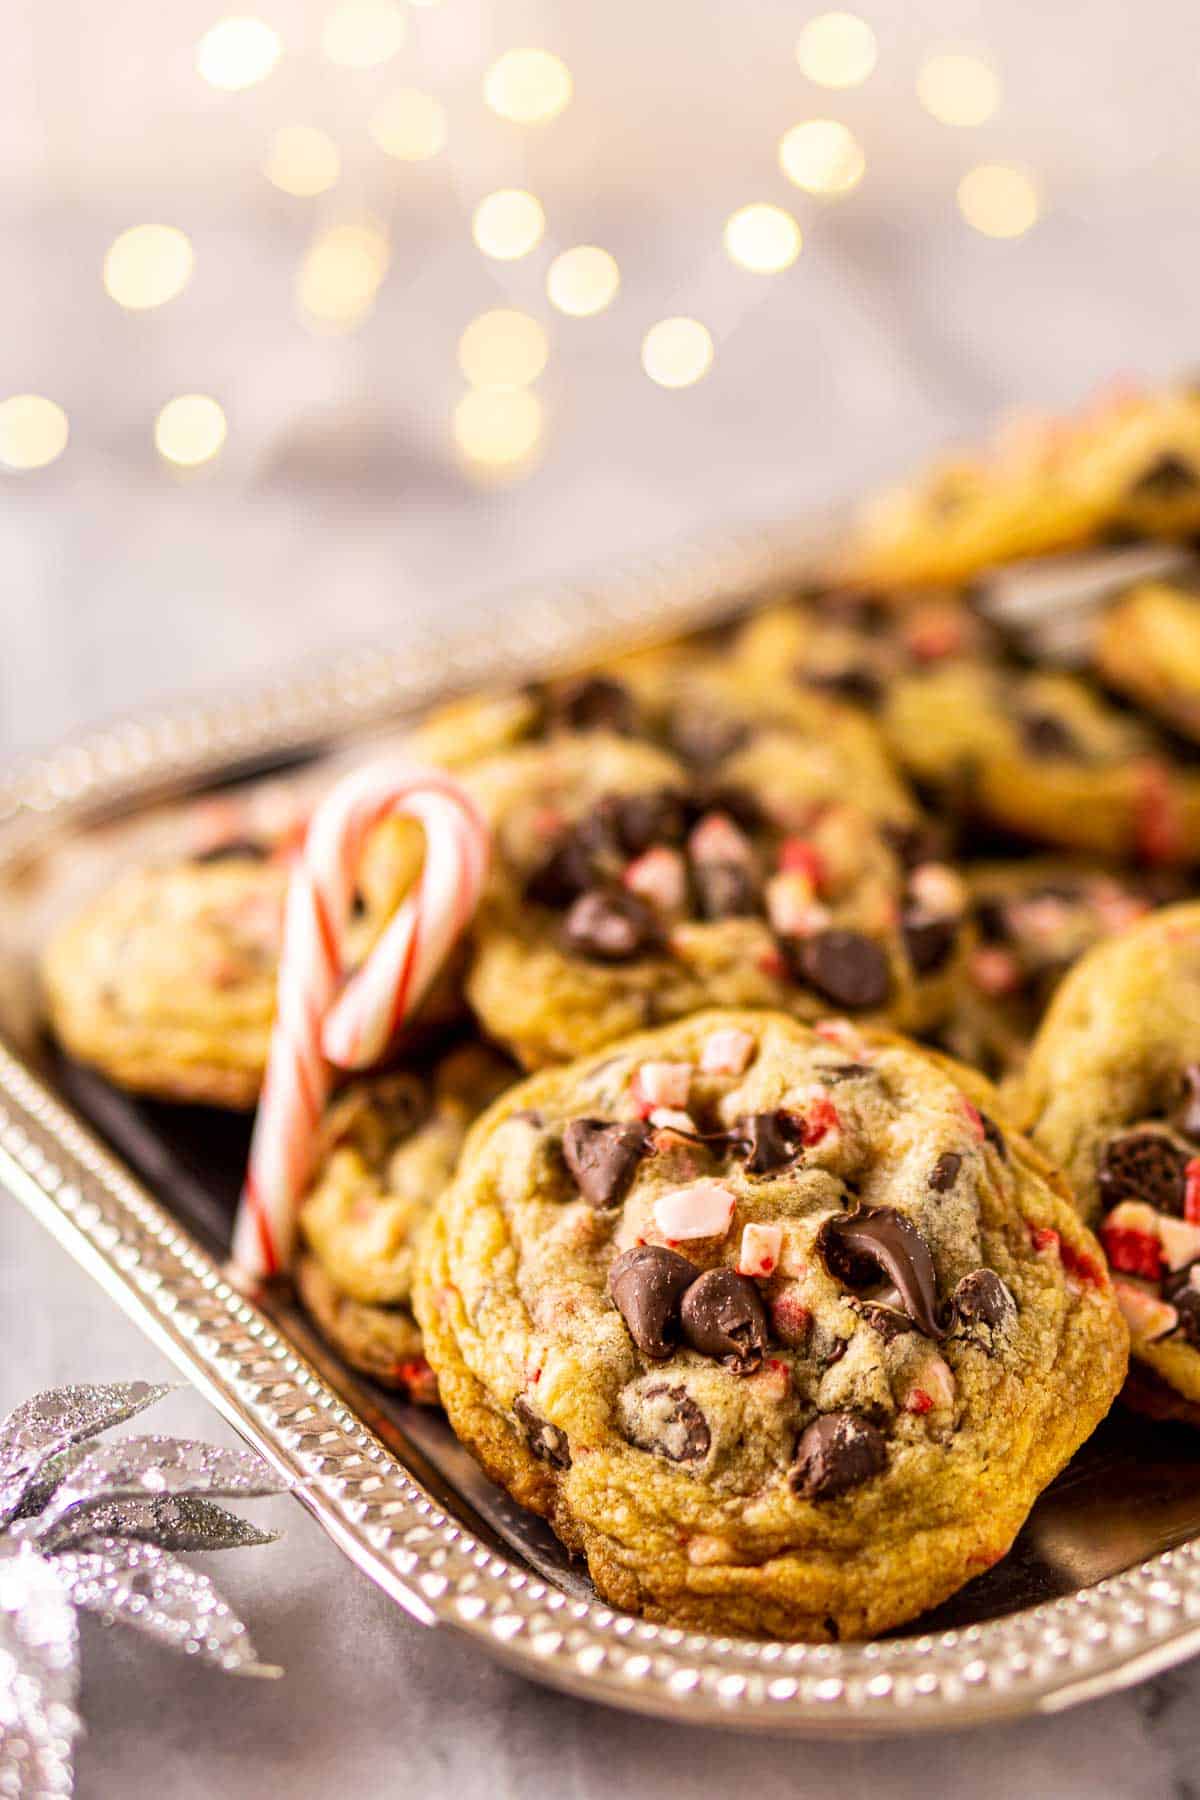 A close-up view of a peppermint chocolate chip cookie on a silver platter with white lights and a candy cane behind it.